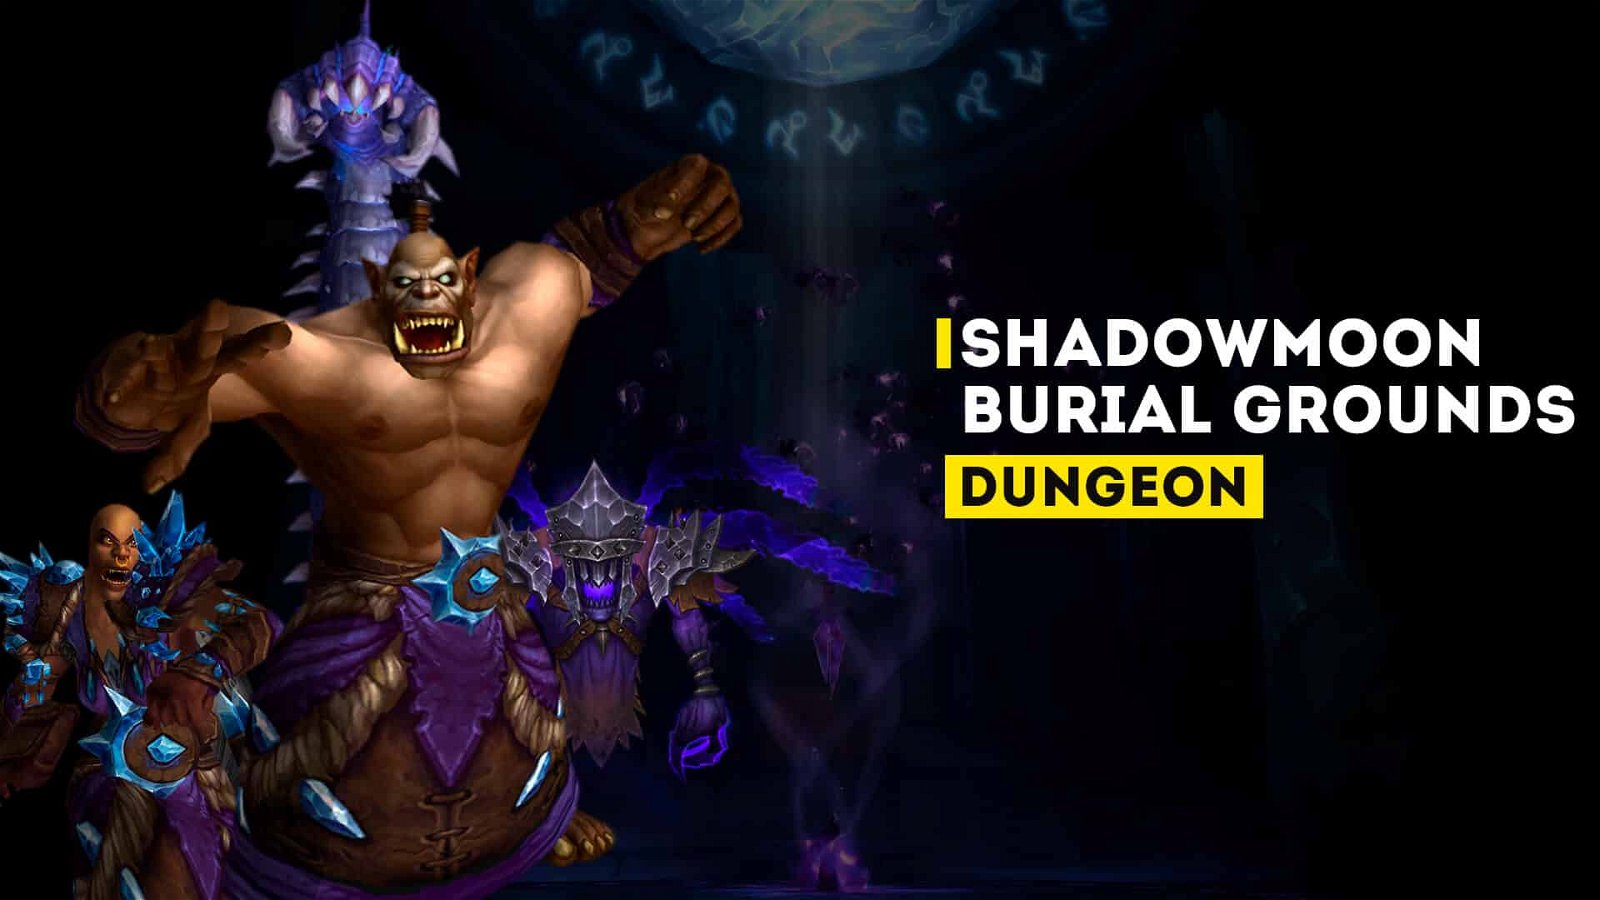 Shadowmoon Burial Grounds Mythic+ Dungeon Guide